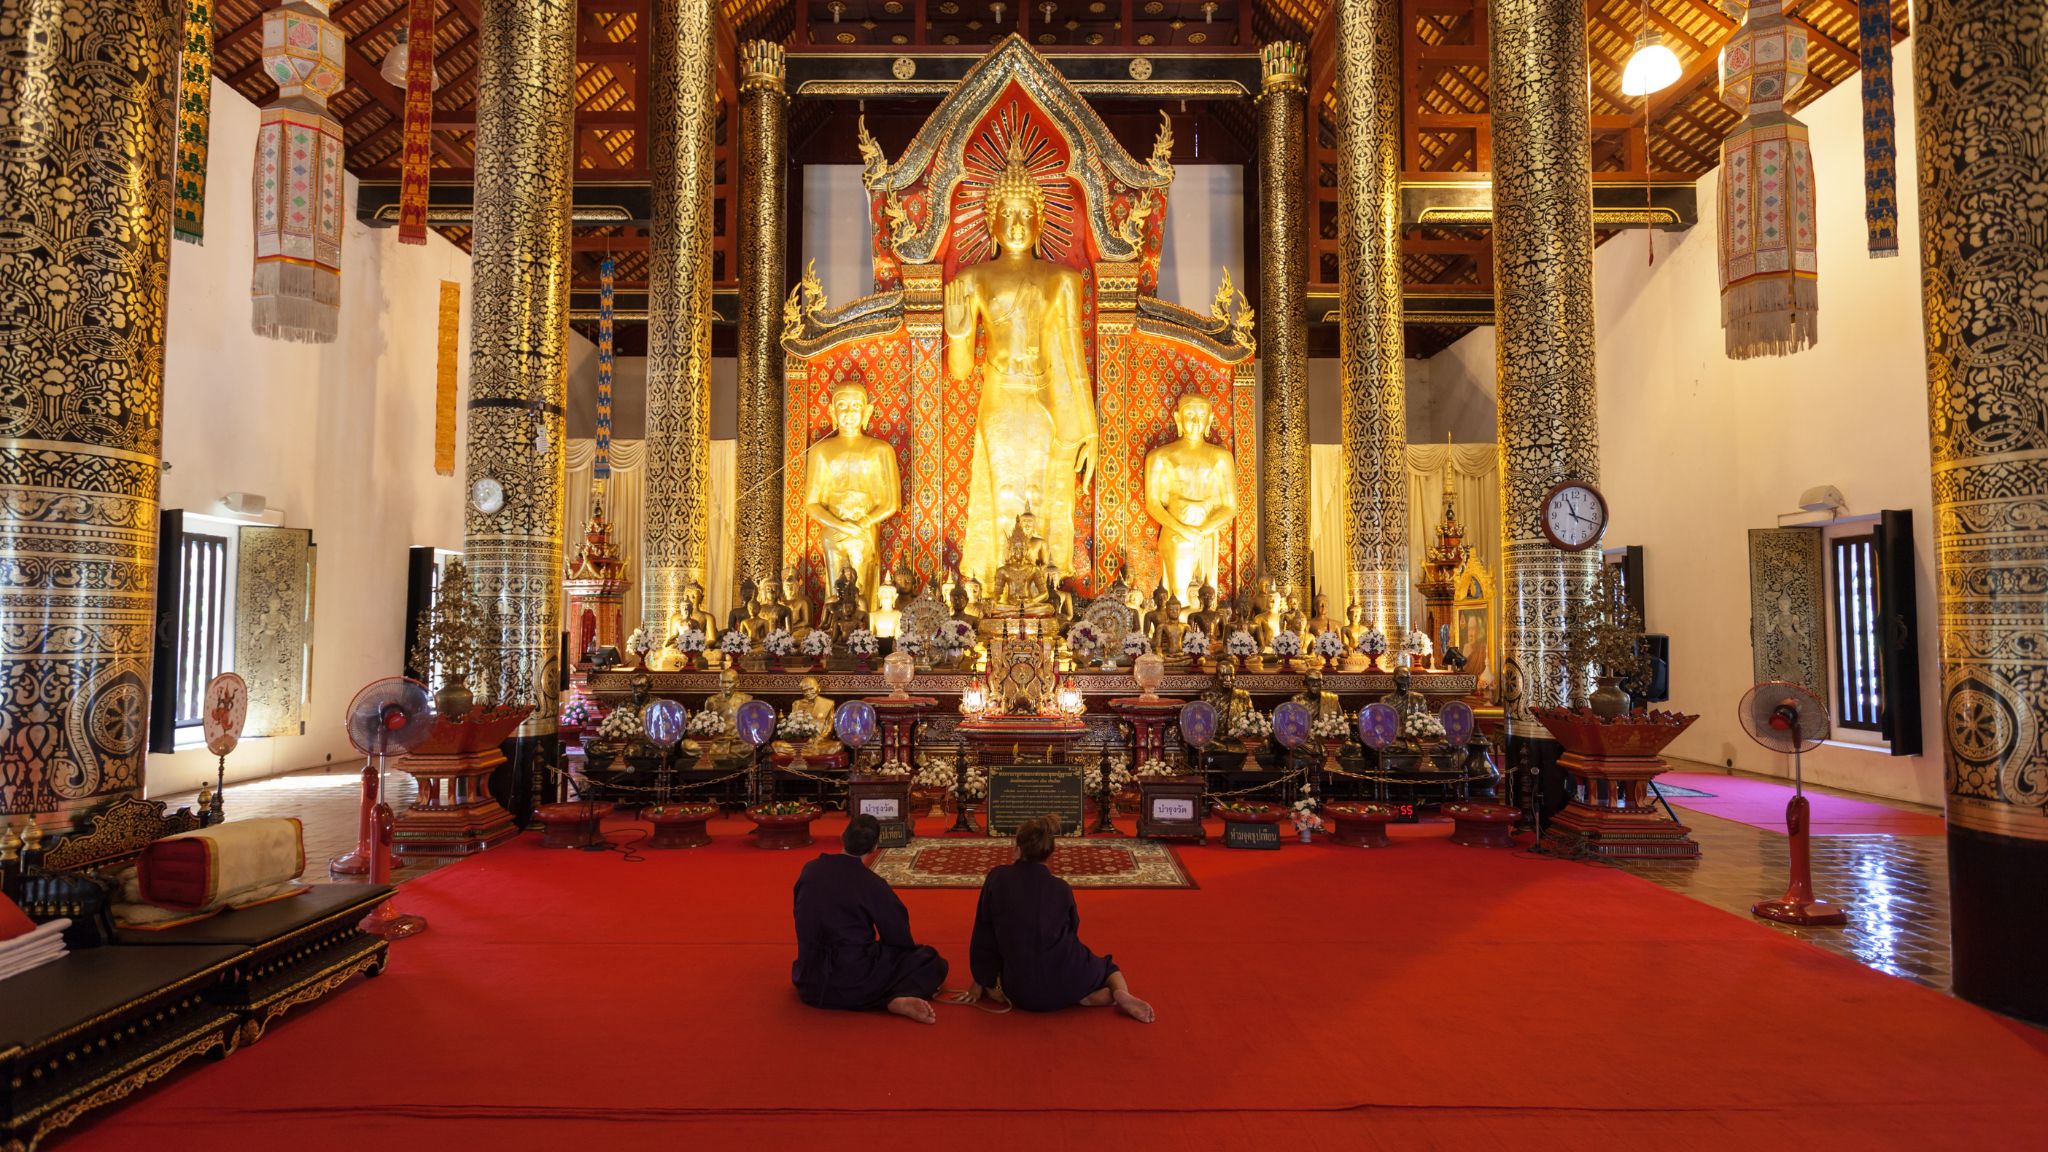 Day 6 Learn About The Diverse Culture In Wat Chedi Luang